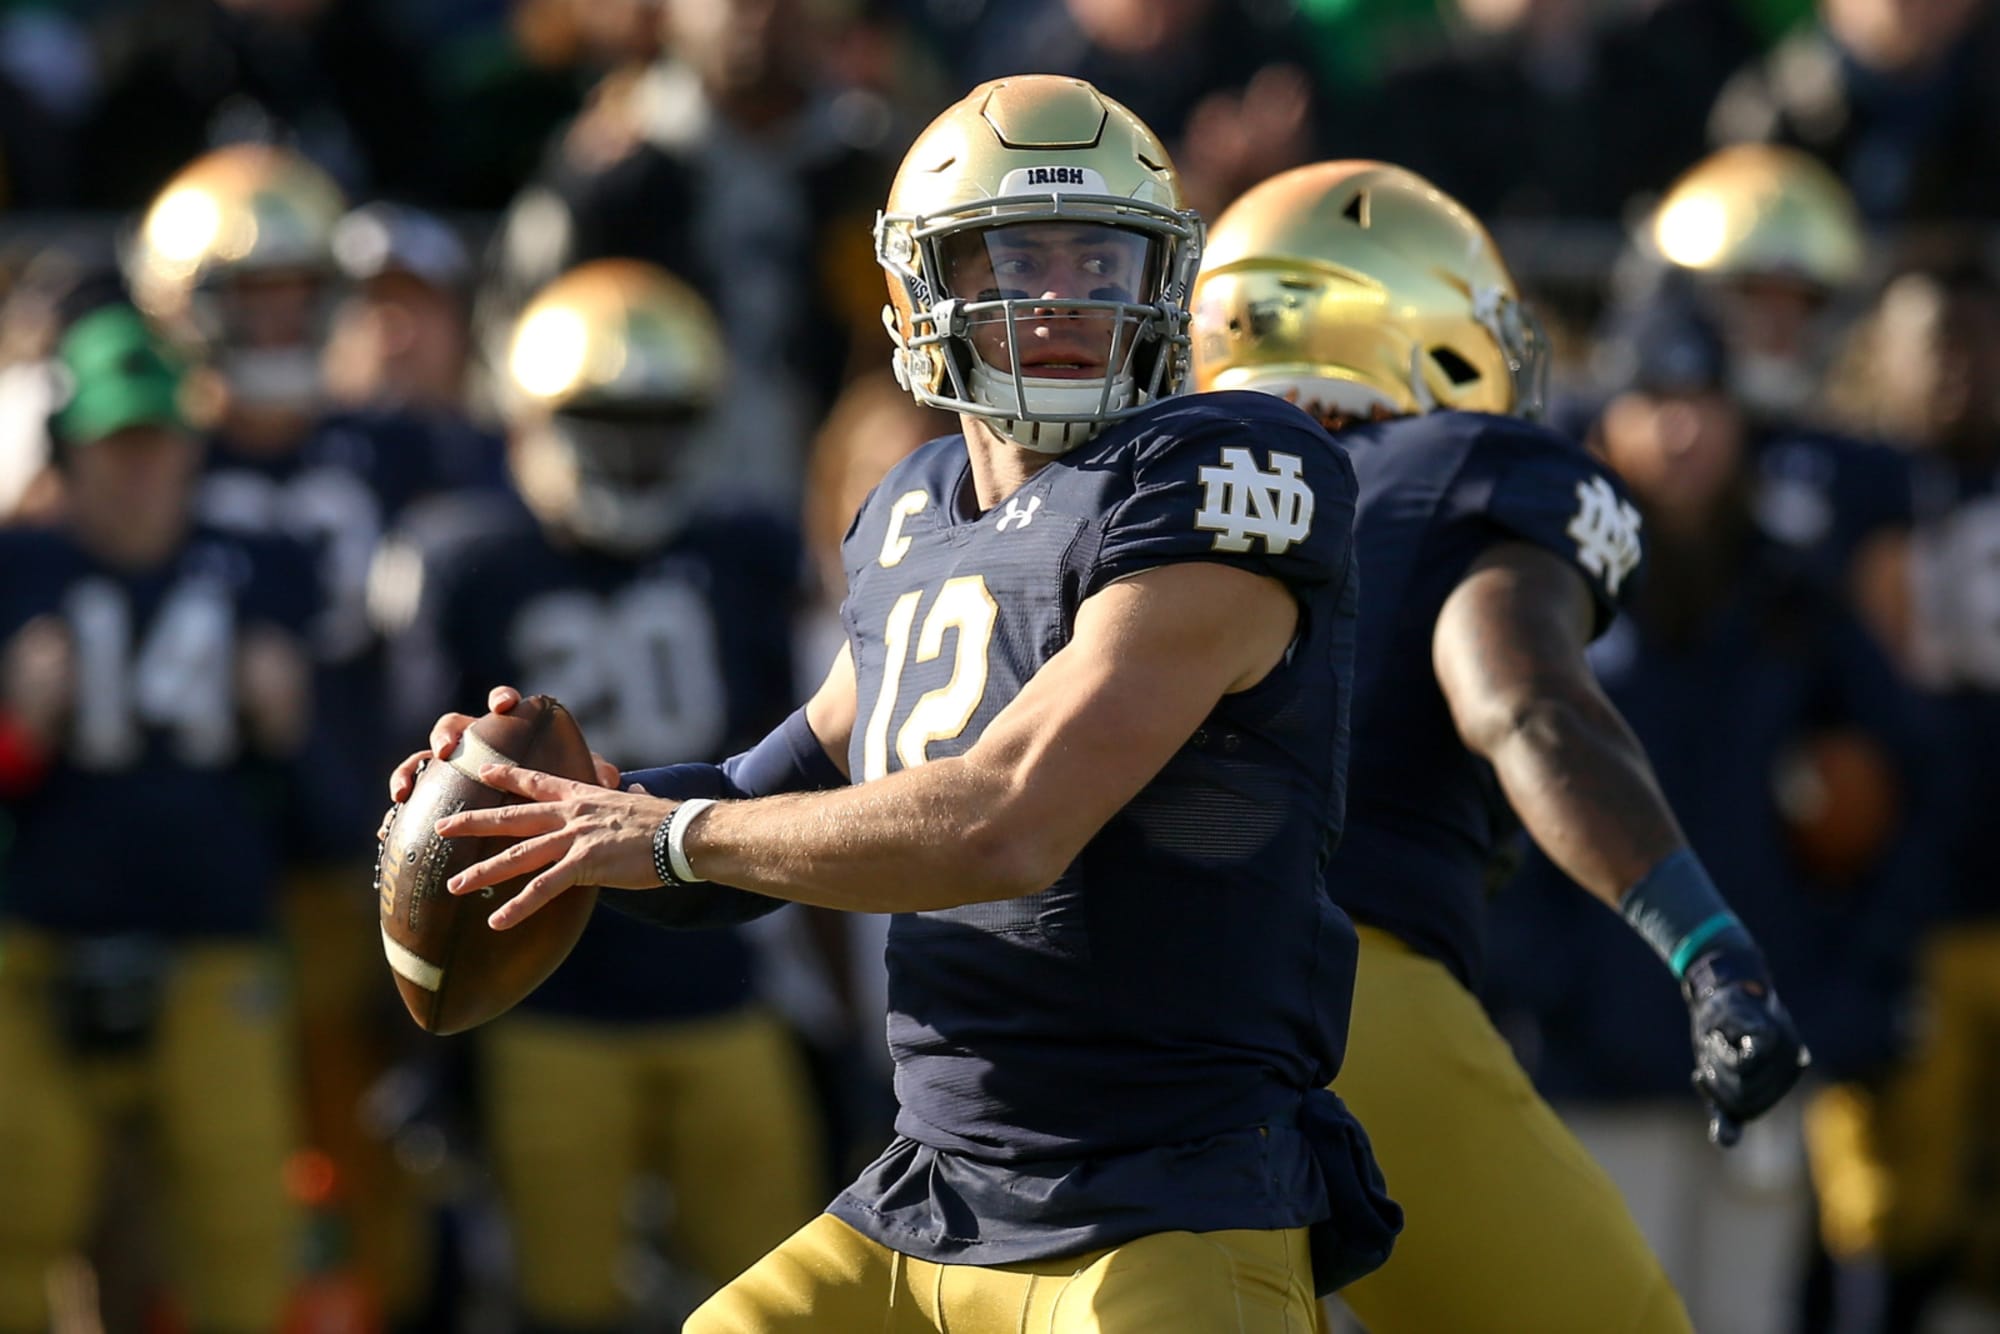 Notre Dame Football Game vs Navy in Ireland is still on for 2020